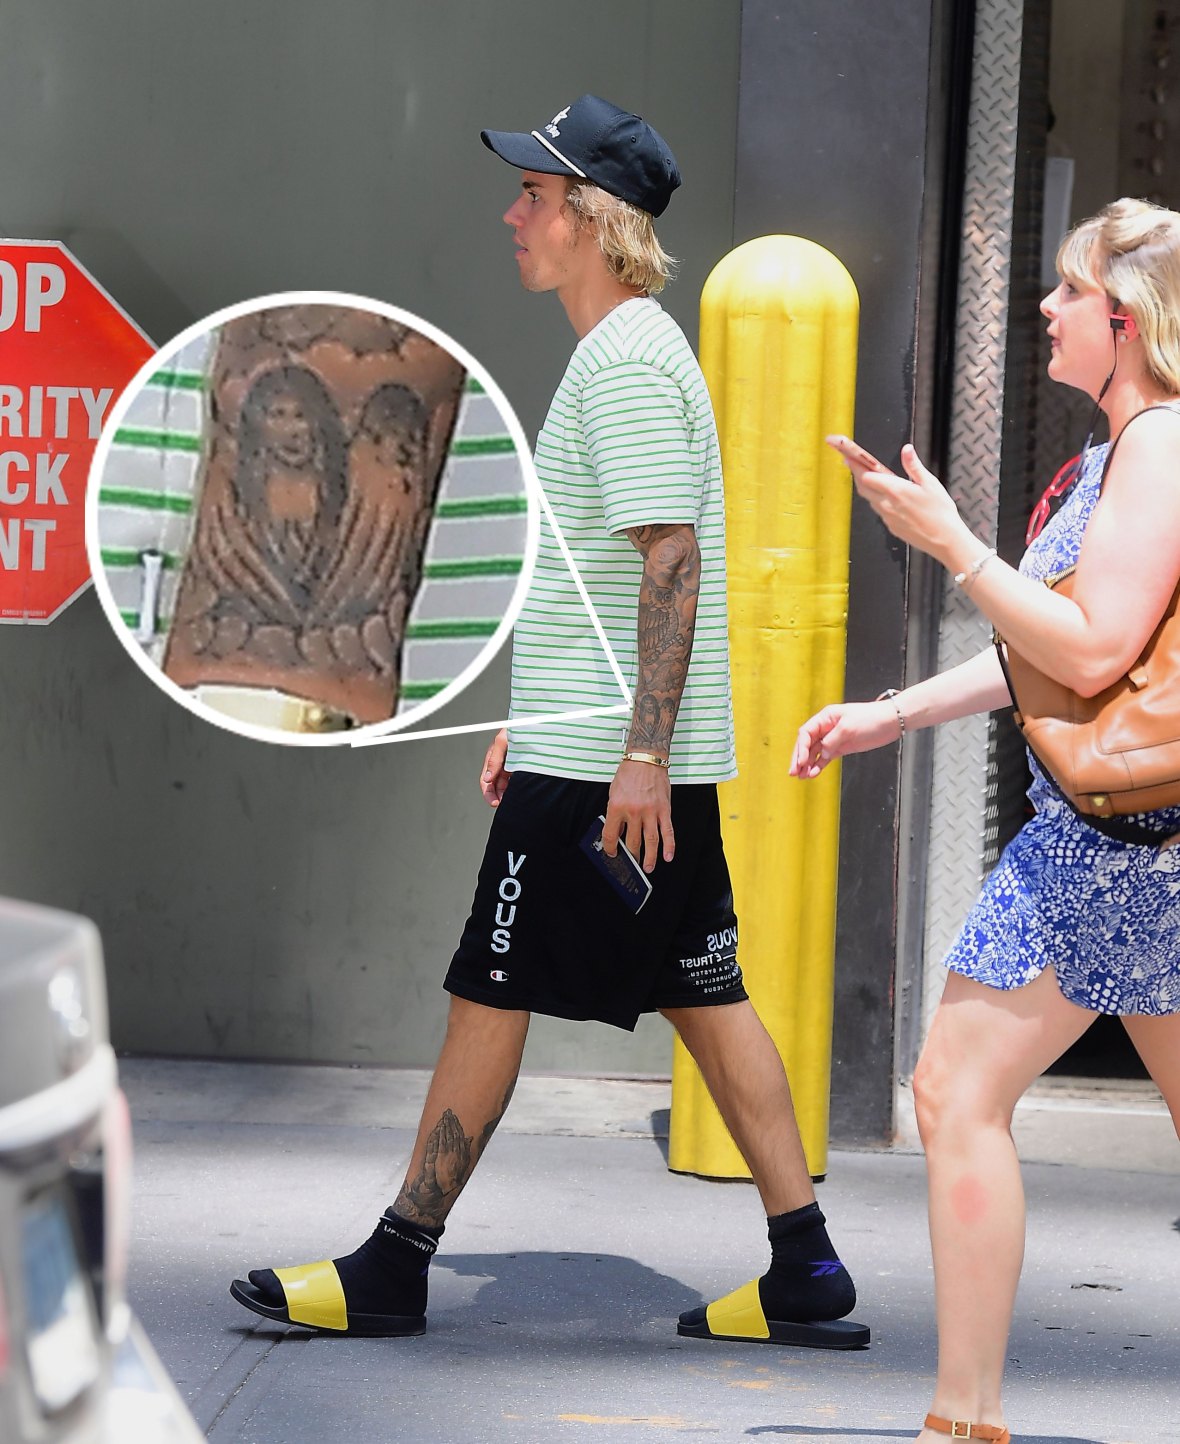 Justin Bieber's Selena Gomez Tattoo Is Still on His Arm Even Though He's  Engaged to Hailey Baldwin